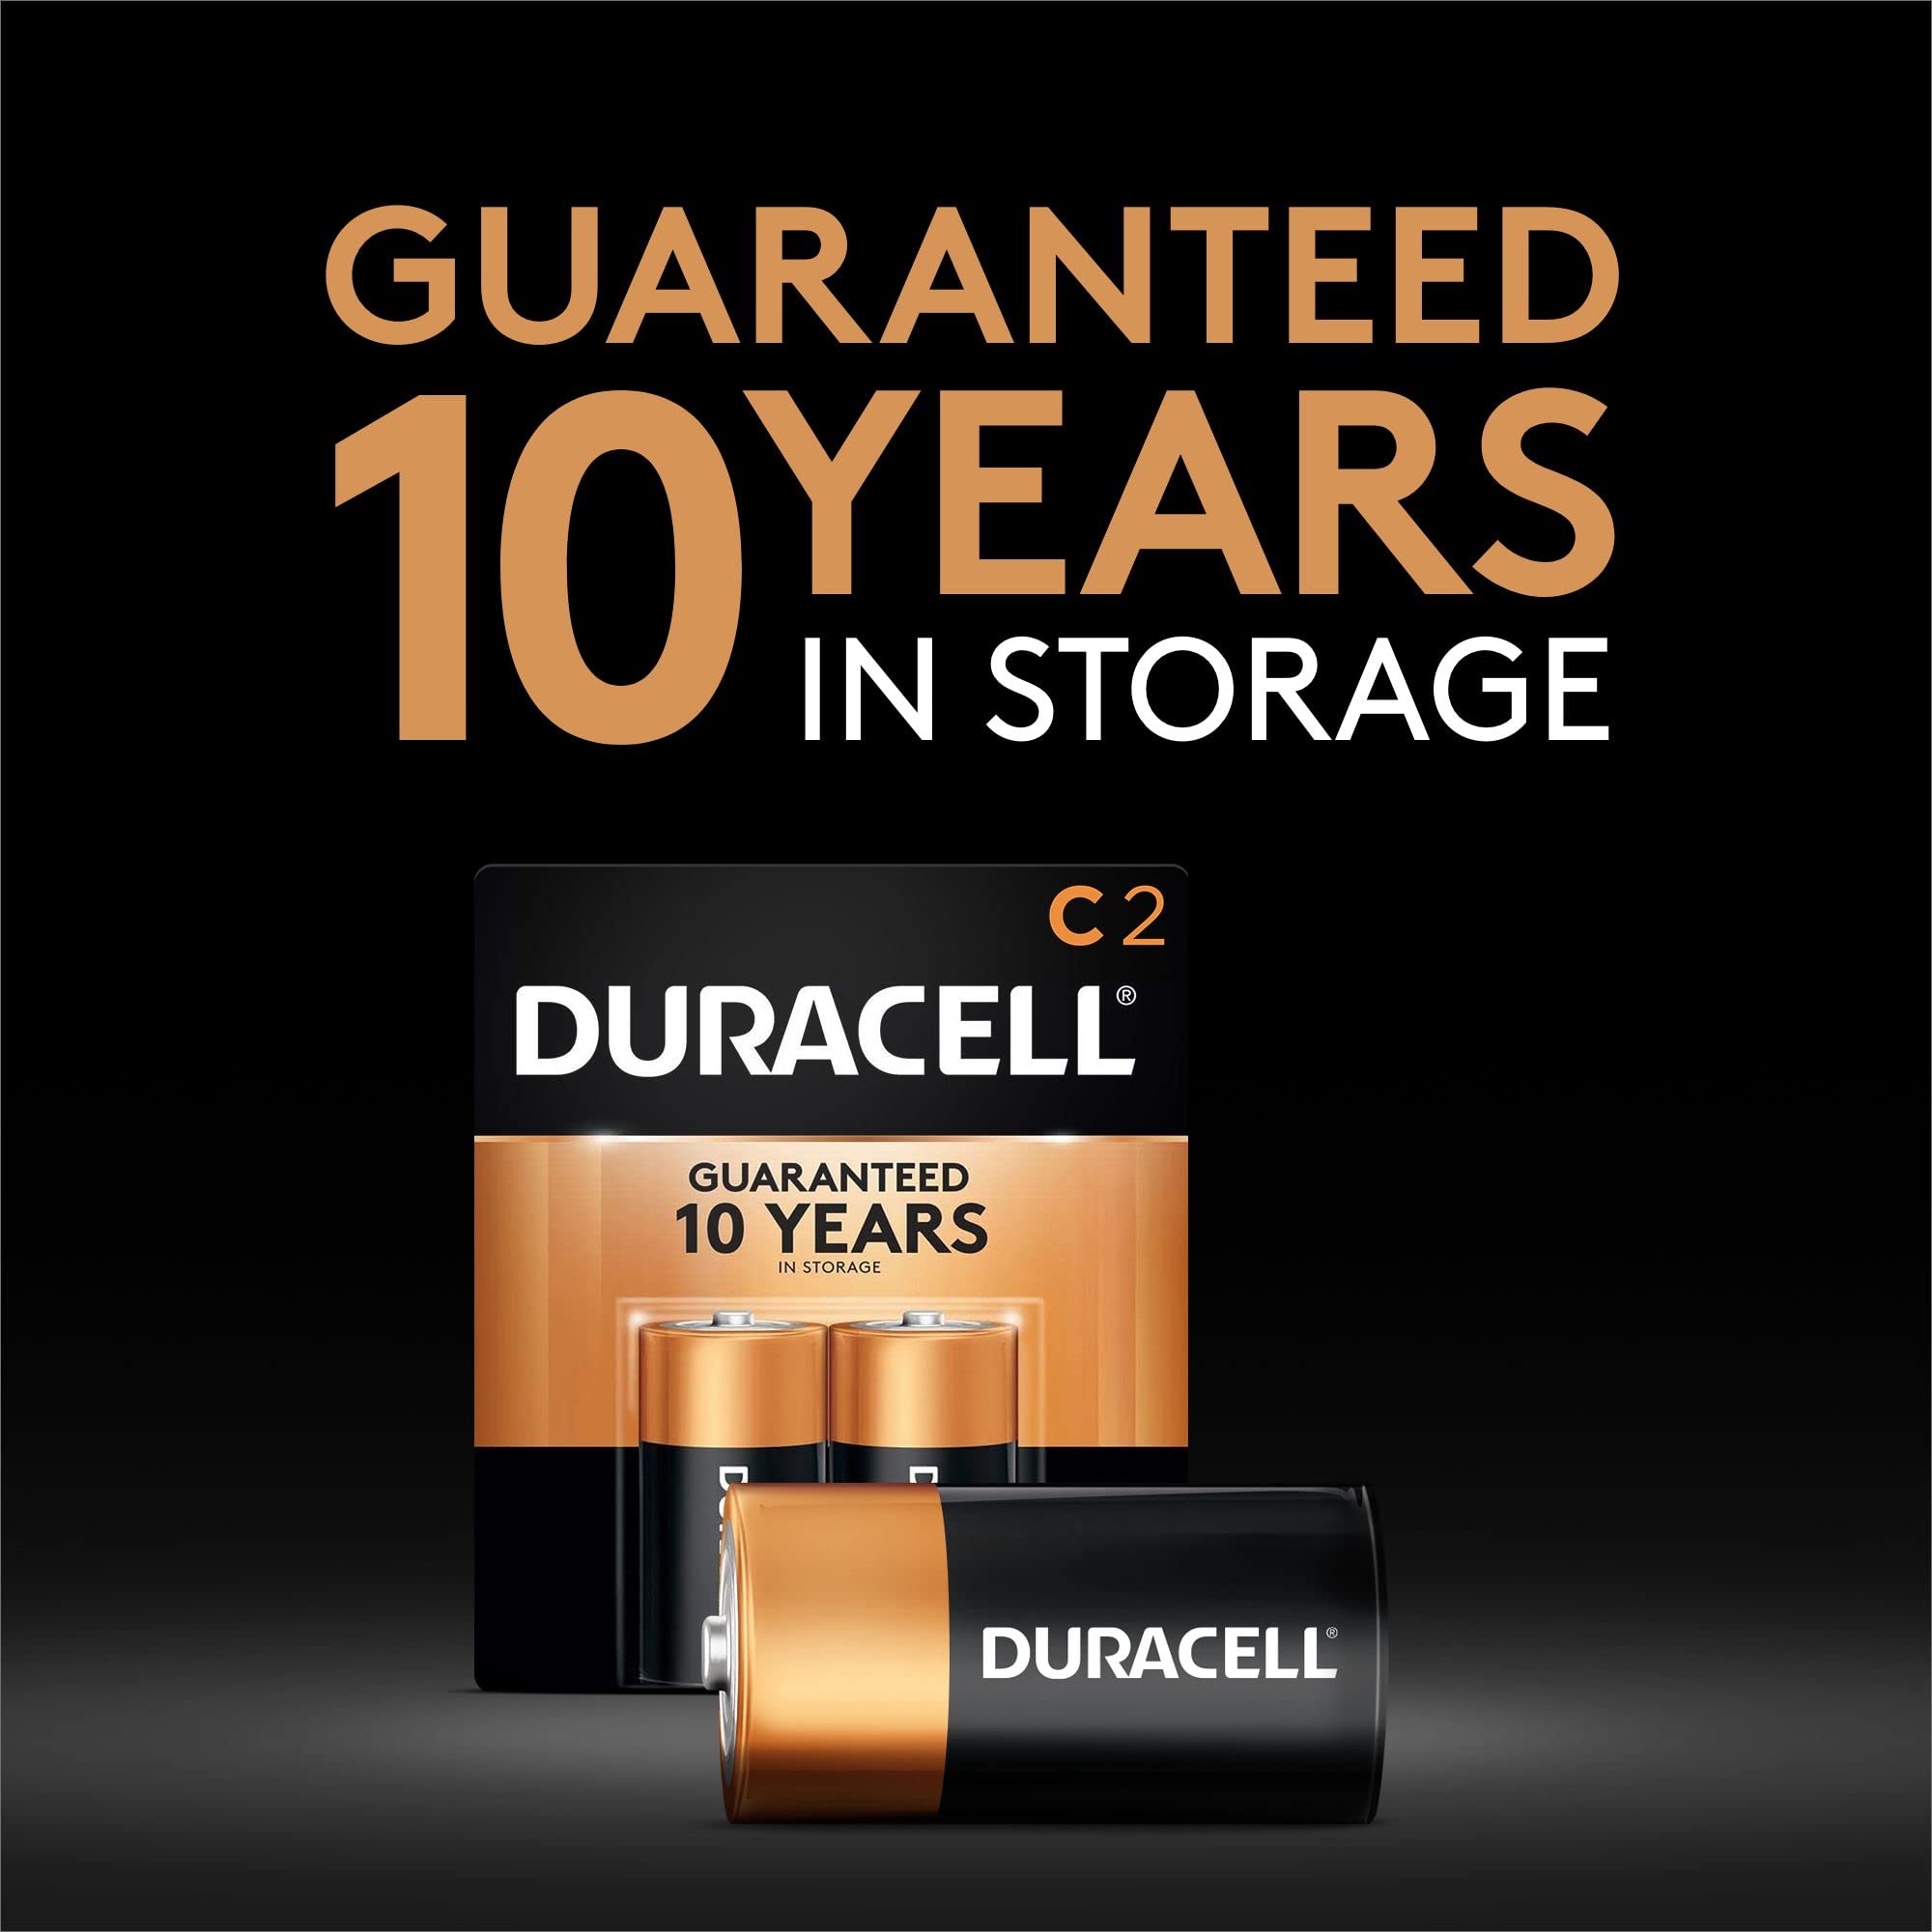 DURACELL Coppertop 1.5V Size C Alkaline Battery, (Pack of 6) - image 3 of 5